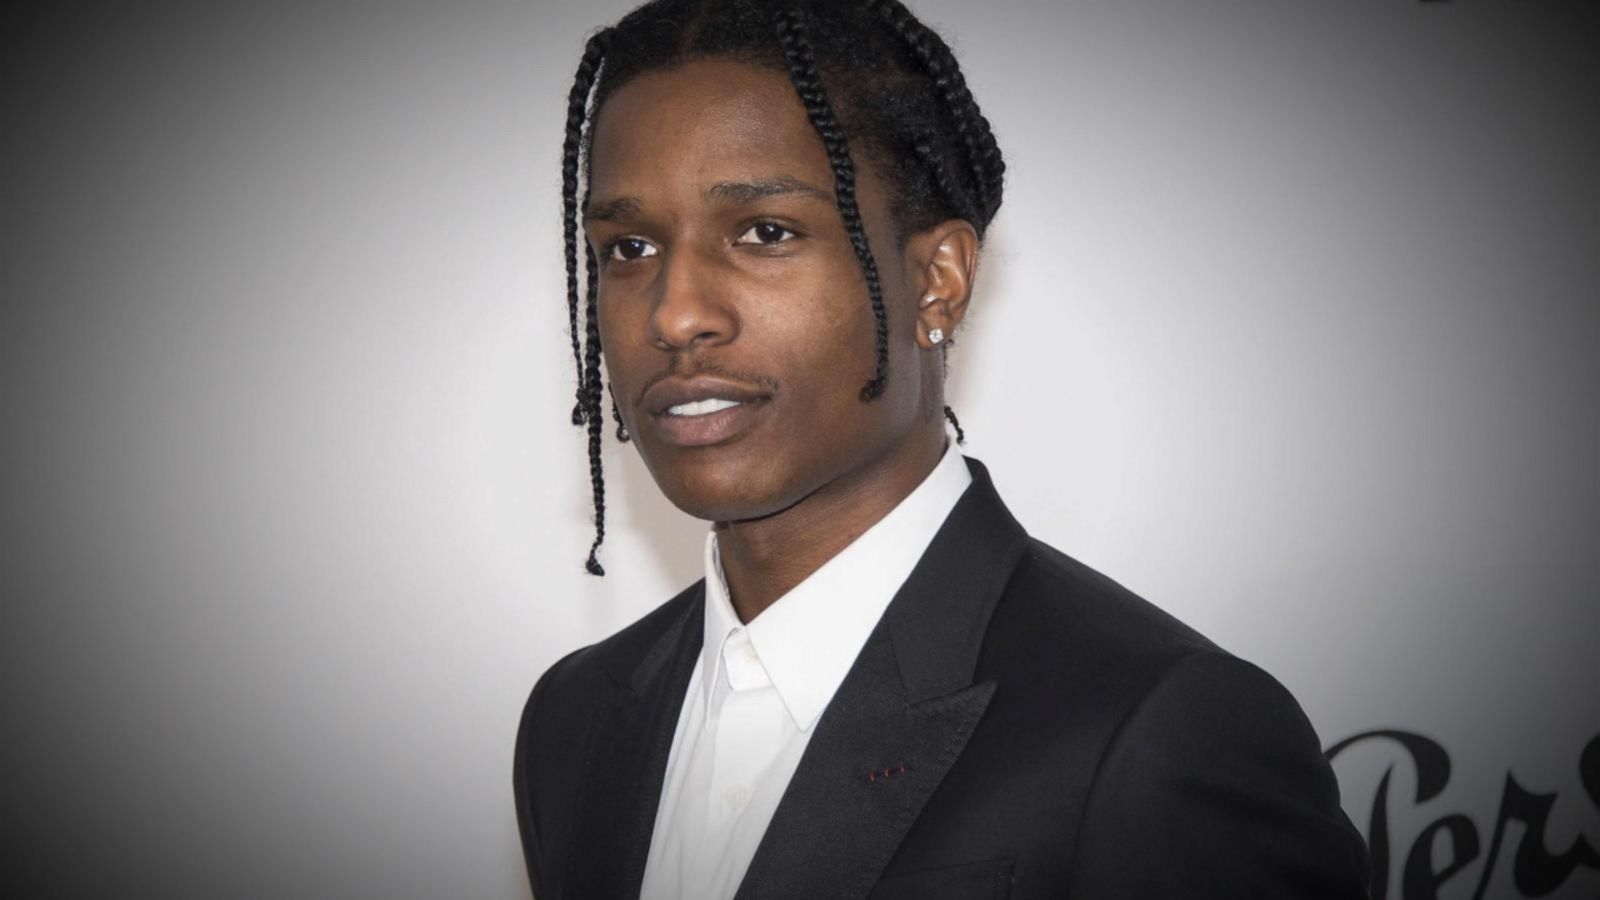 A$AP Rocky appears in Sweden court - Good Morning America